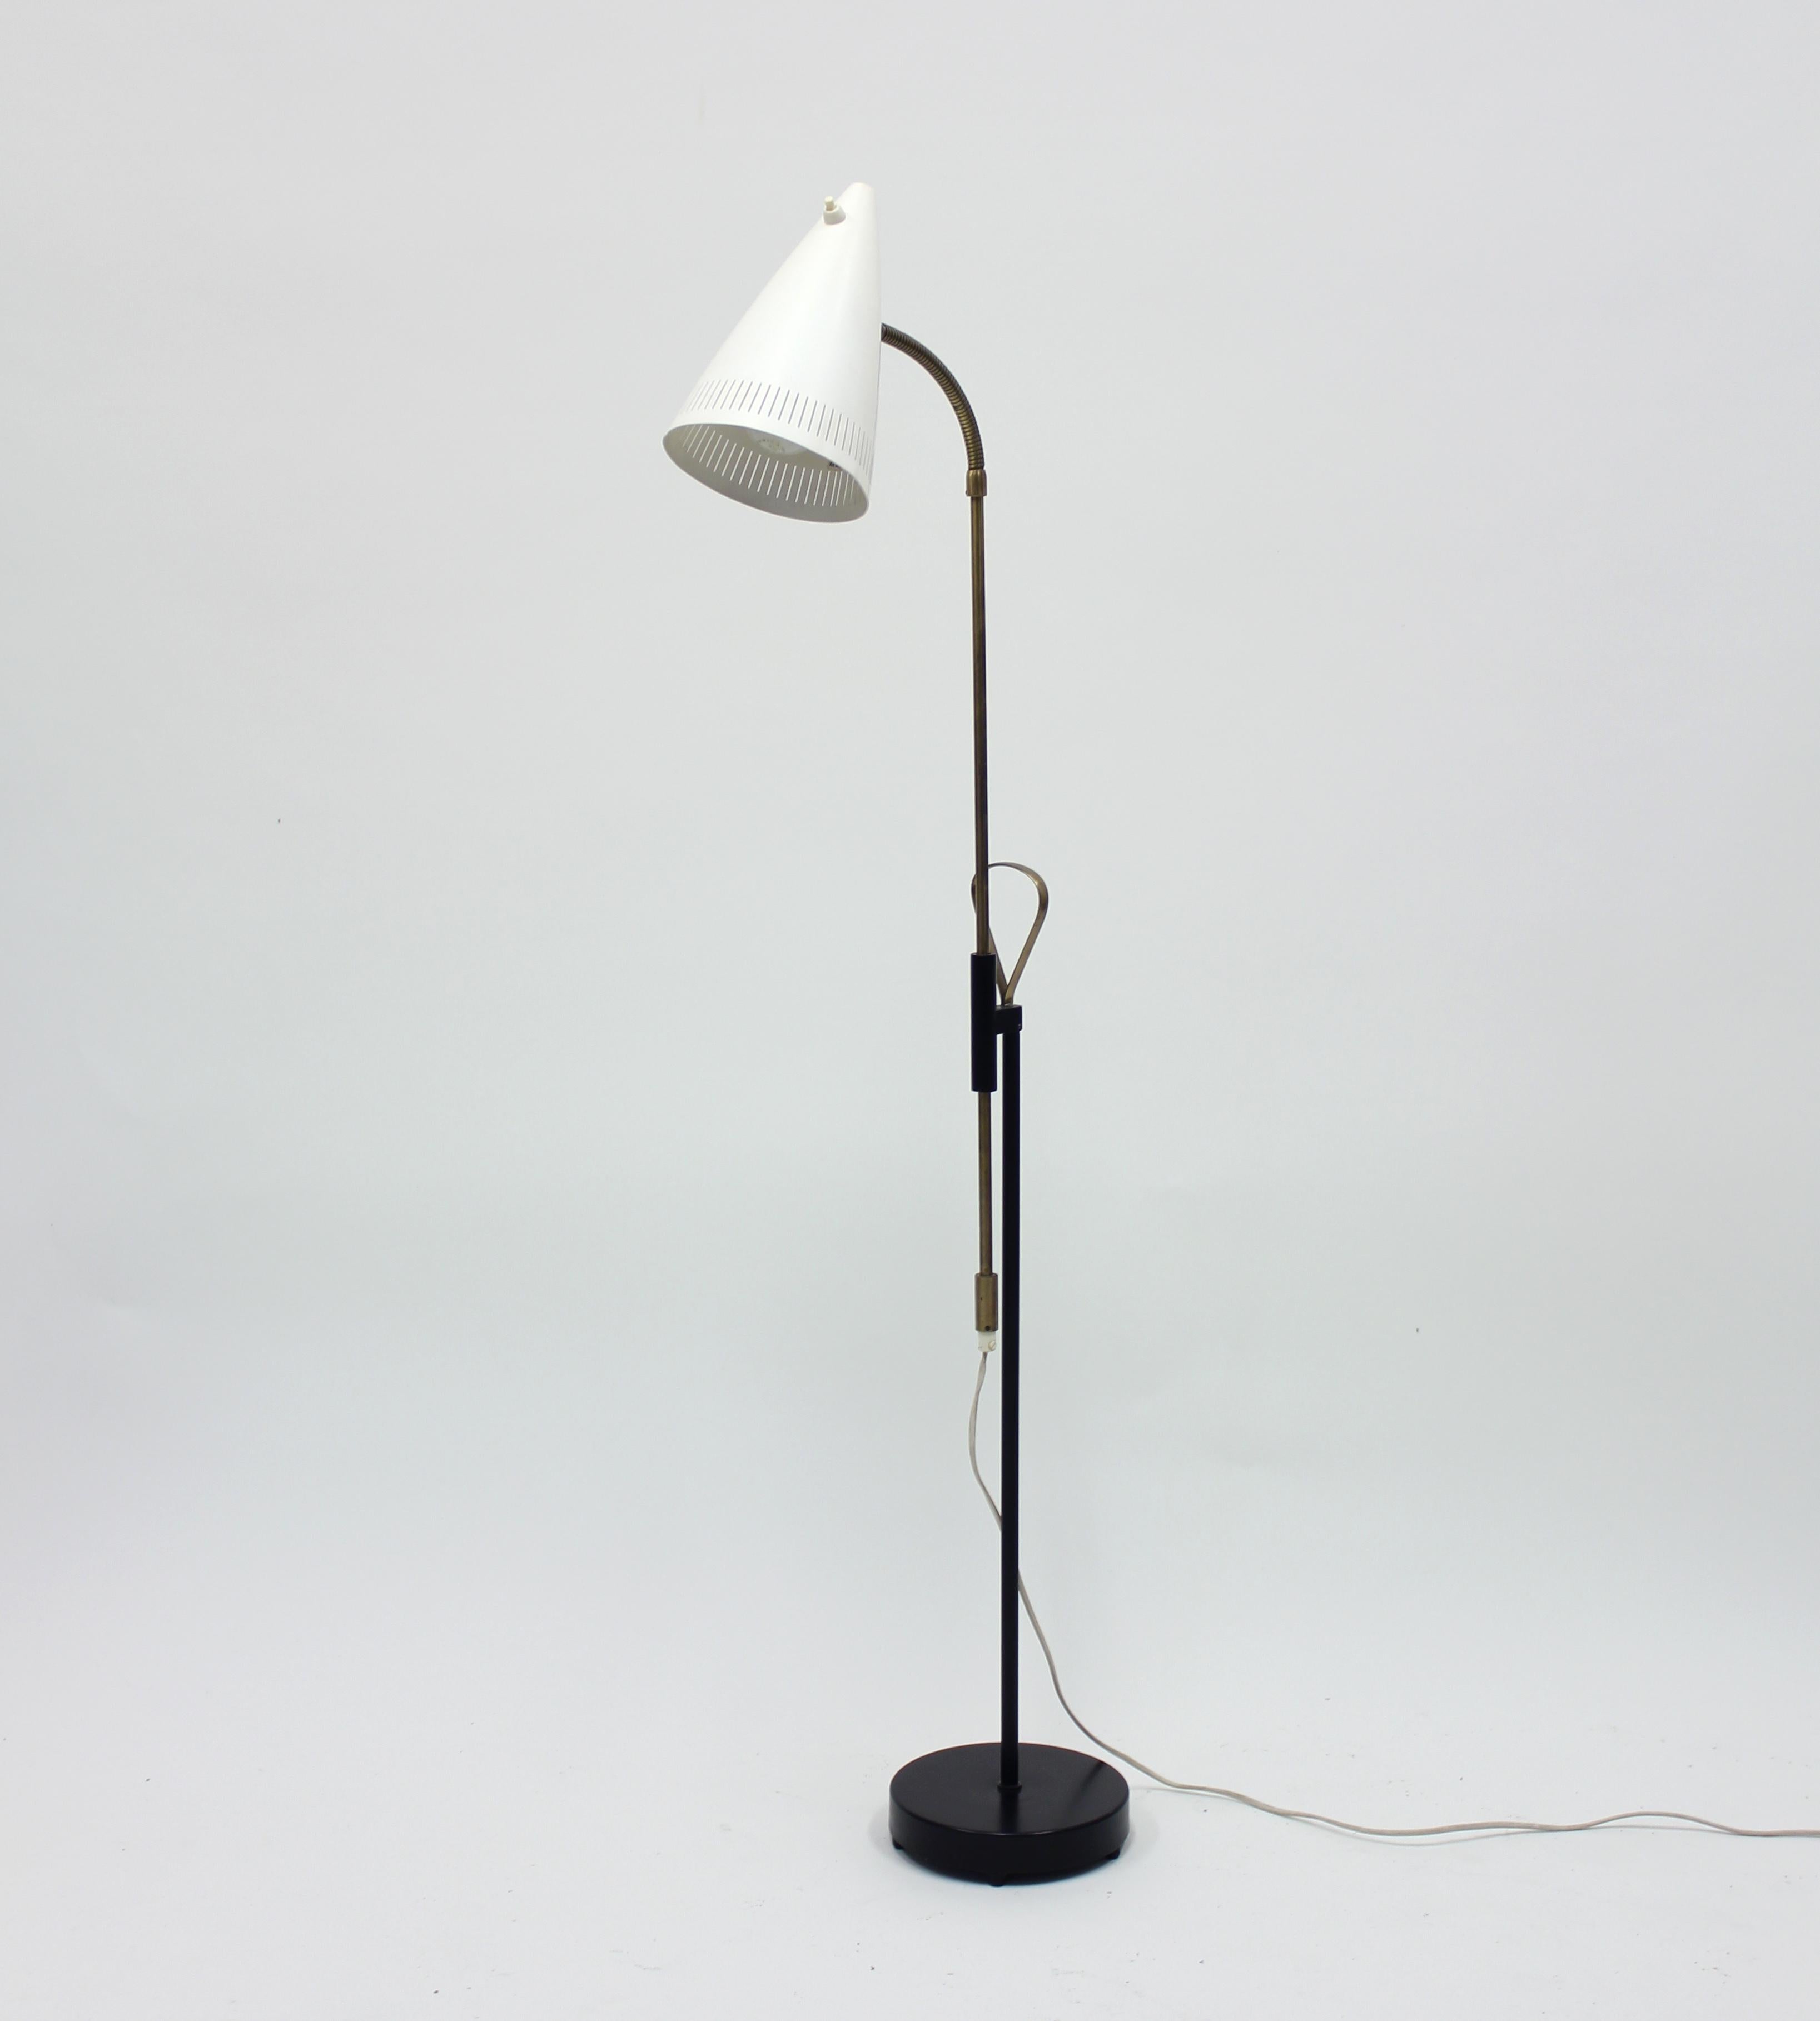 Midcentury floor lamp from Swedish manufacturer Falkenbergs belysning. Height adjustable between 136 - 186 cm. Iron base with a brass stem and original white sheet metal shade. Marked with makers mark under the base. Good vintage condition.